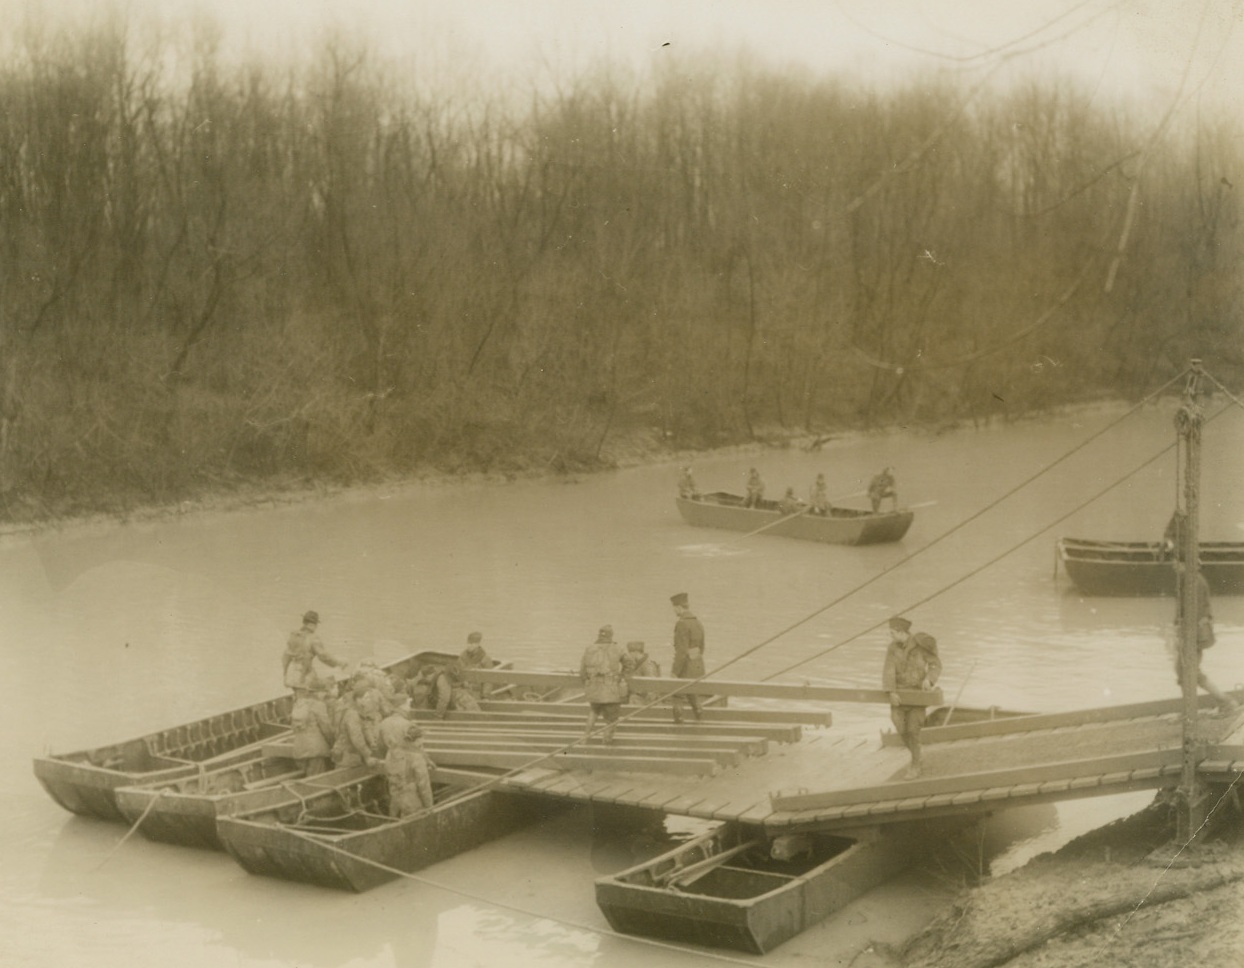 Army’s Armored Division Crosses River, 12/13/1940  Fort Knox, KY—Despite rain and mud, engineers of the First Armored Division erect a pontoon bridge during river crossing exercises, December 13. 11-ton tanks and armored cars safely crossed the river on the completed project. Other machines were ferried across on pontoon boats. Credit: ACME.;